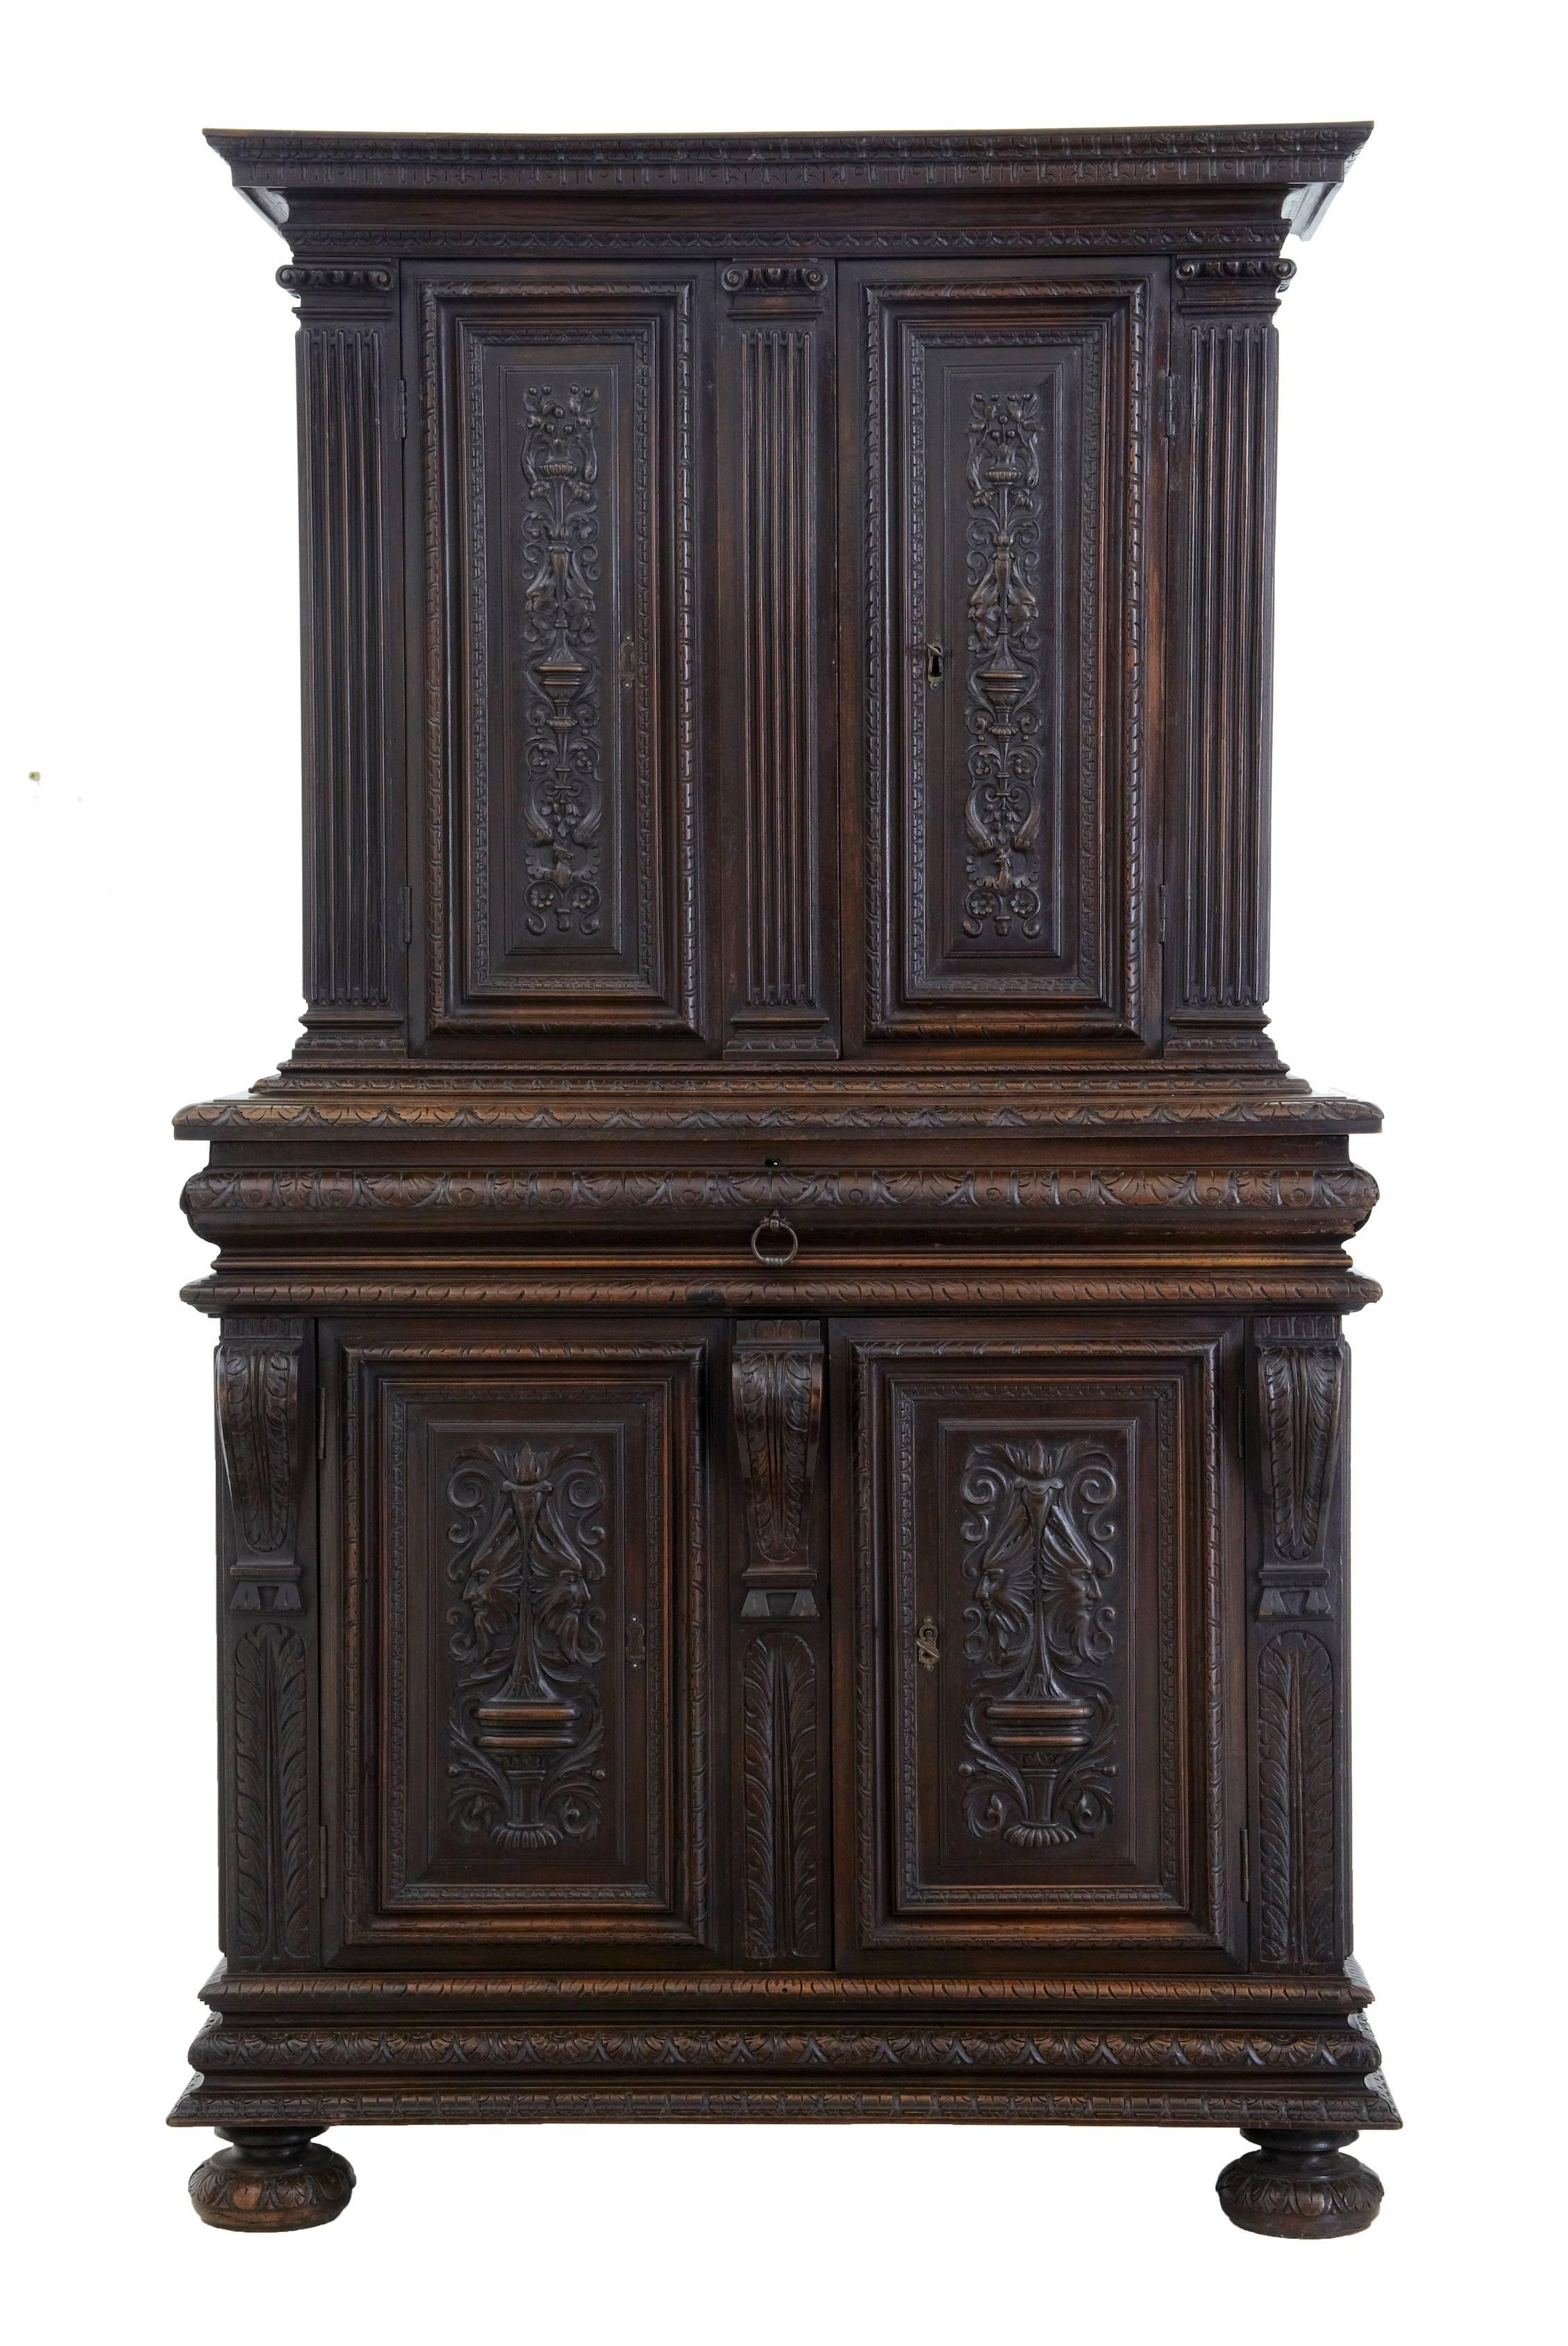 Two-part carved walnut cabinet, circa 1850.
Top section of beautifully carved double doors, flanked by columns, surmounted by cornice. Opens to reveal single shelf inside.
Bottom section comprises of a large drawer below which the double doors